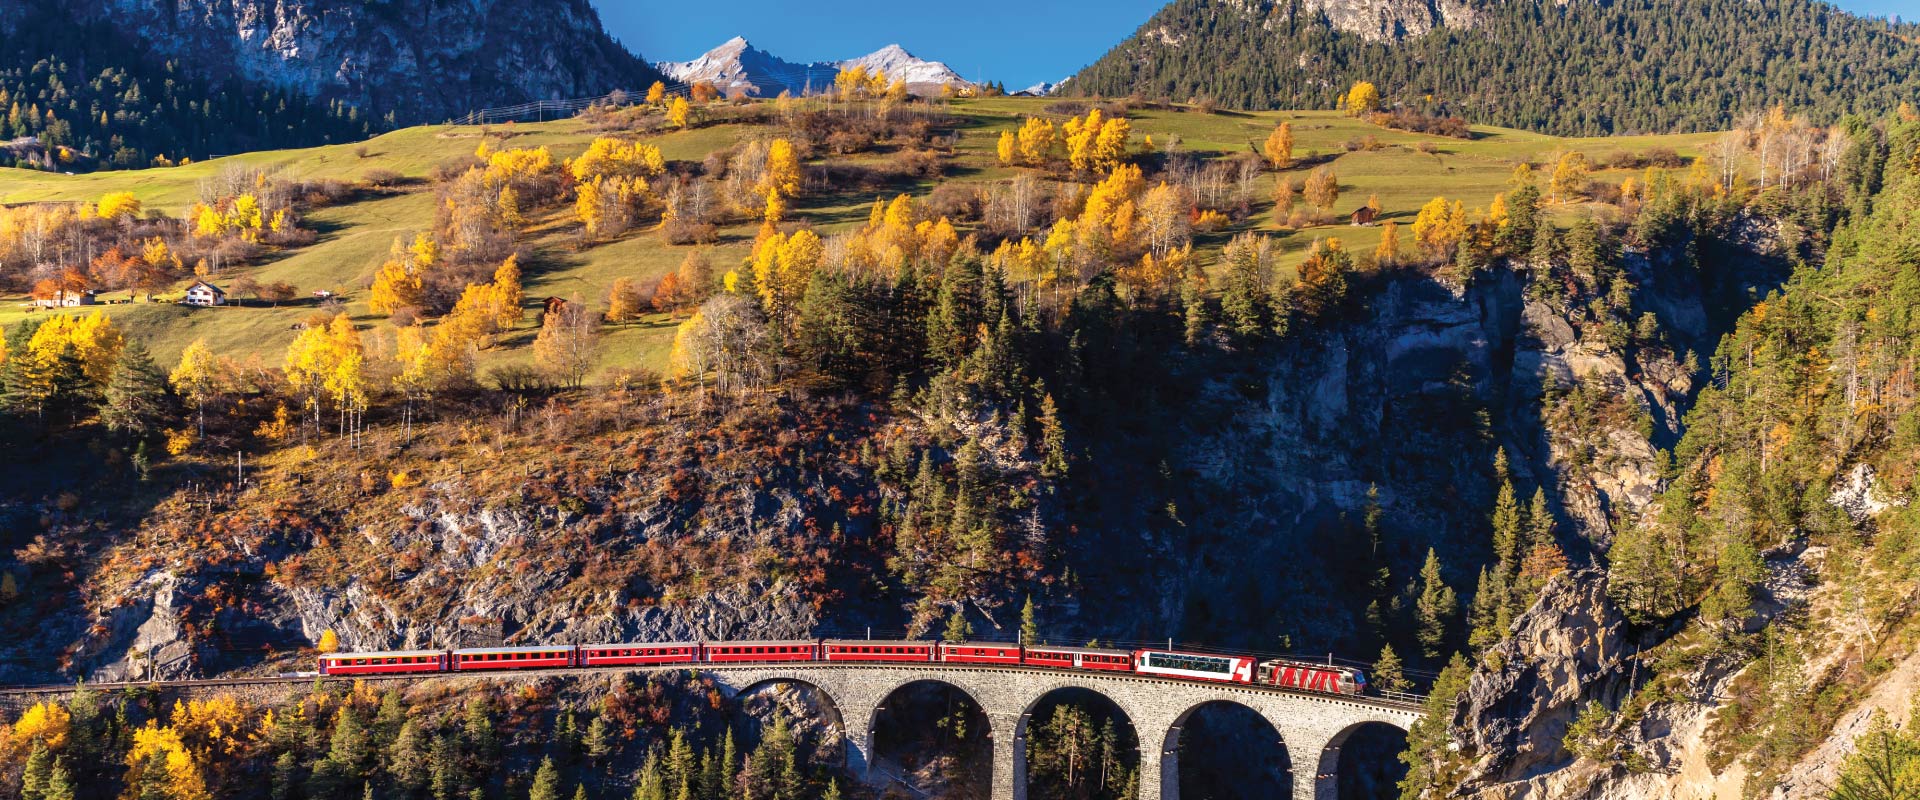 Train travelling across via duct with huge mountains in the background, Switzerland